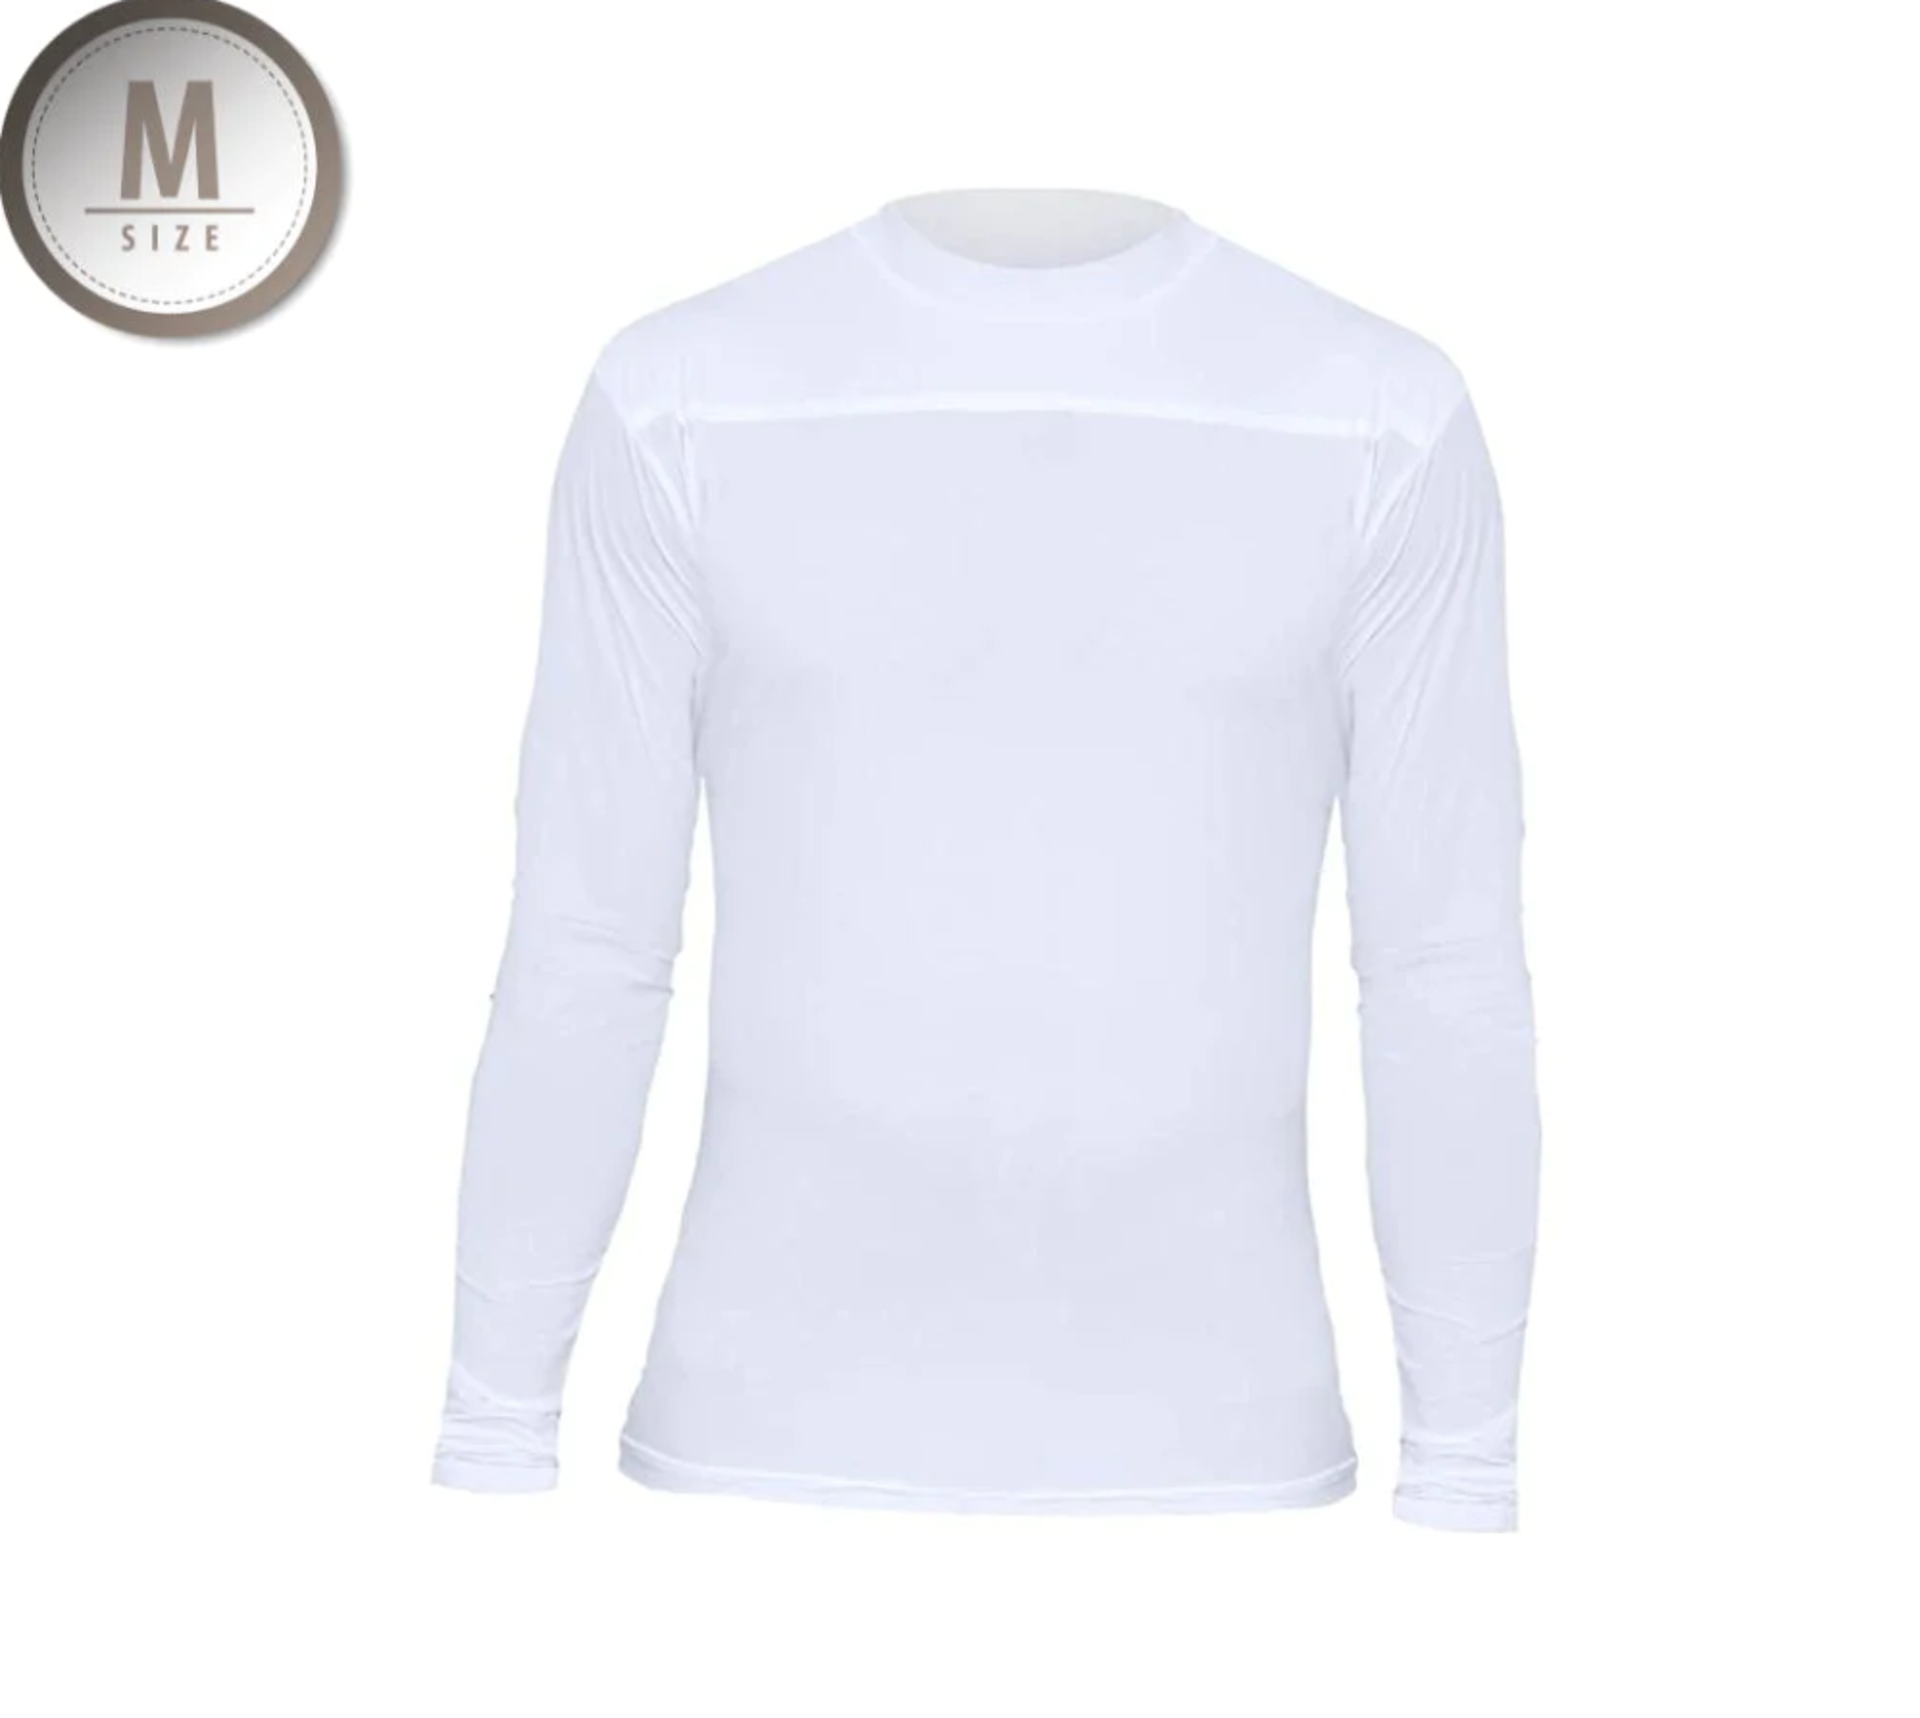 Rynoskin Hunting and Outdoor Long Sleeve Shirt - White